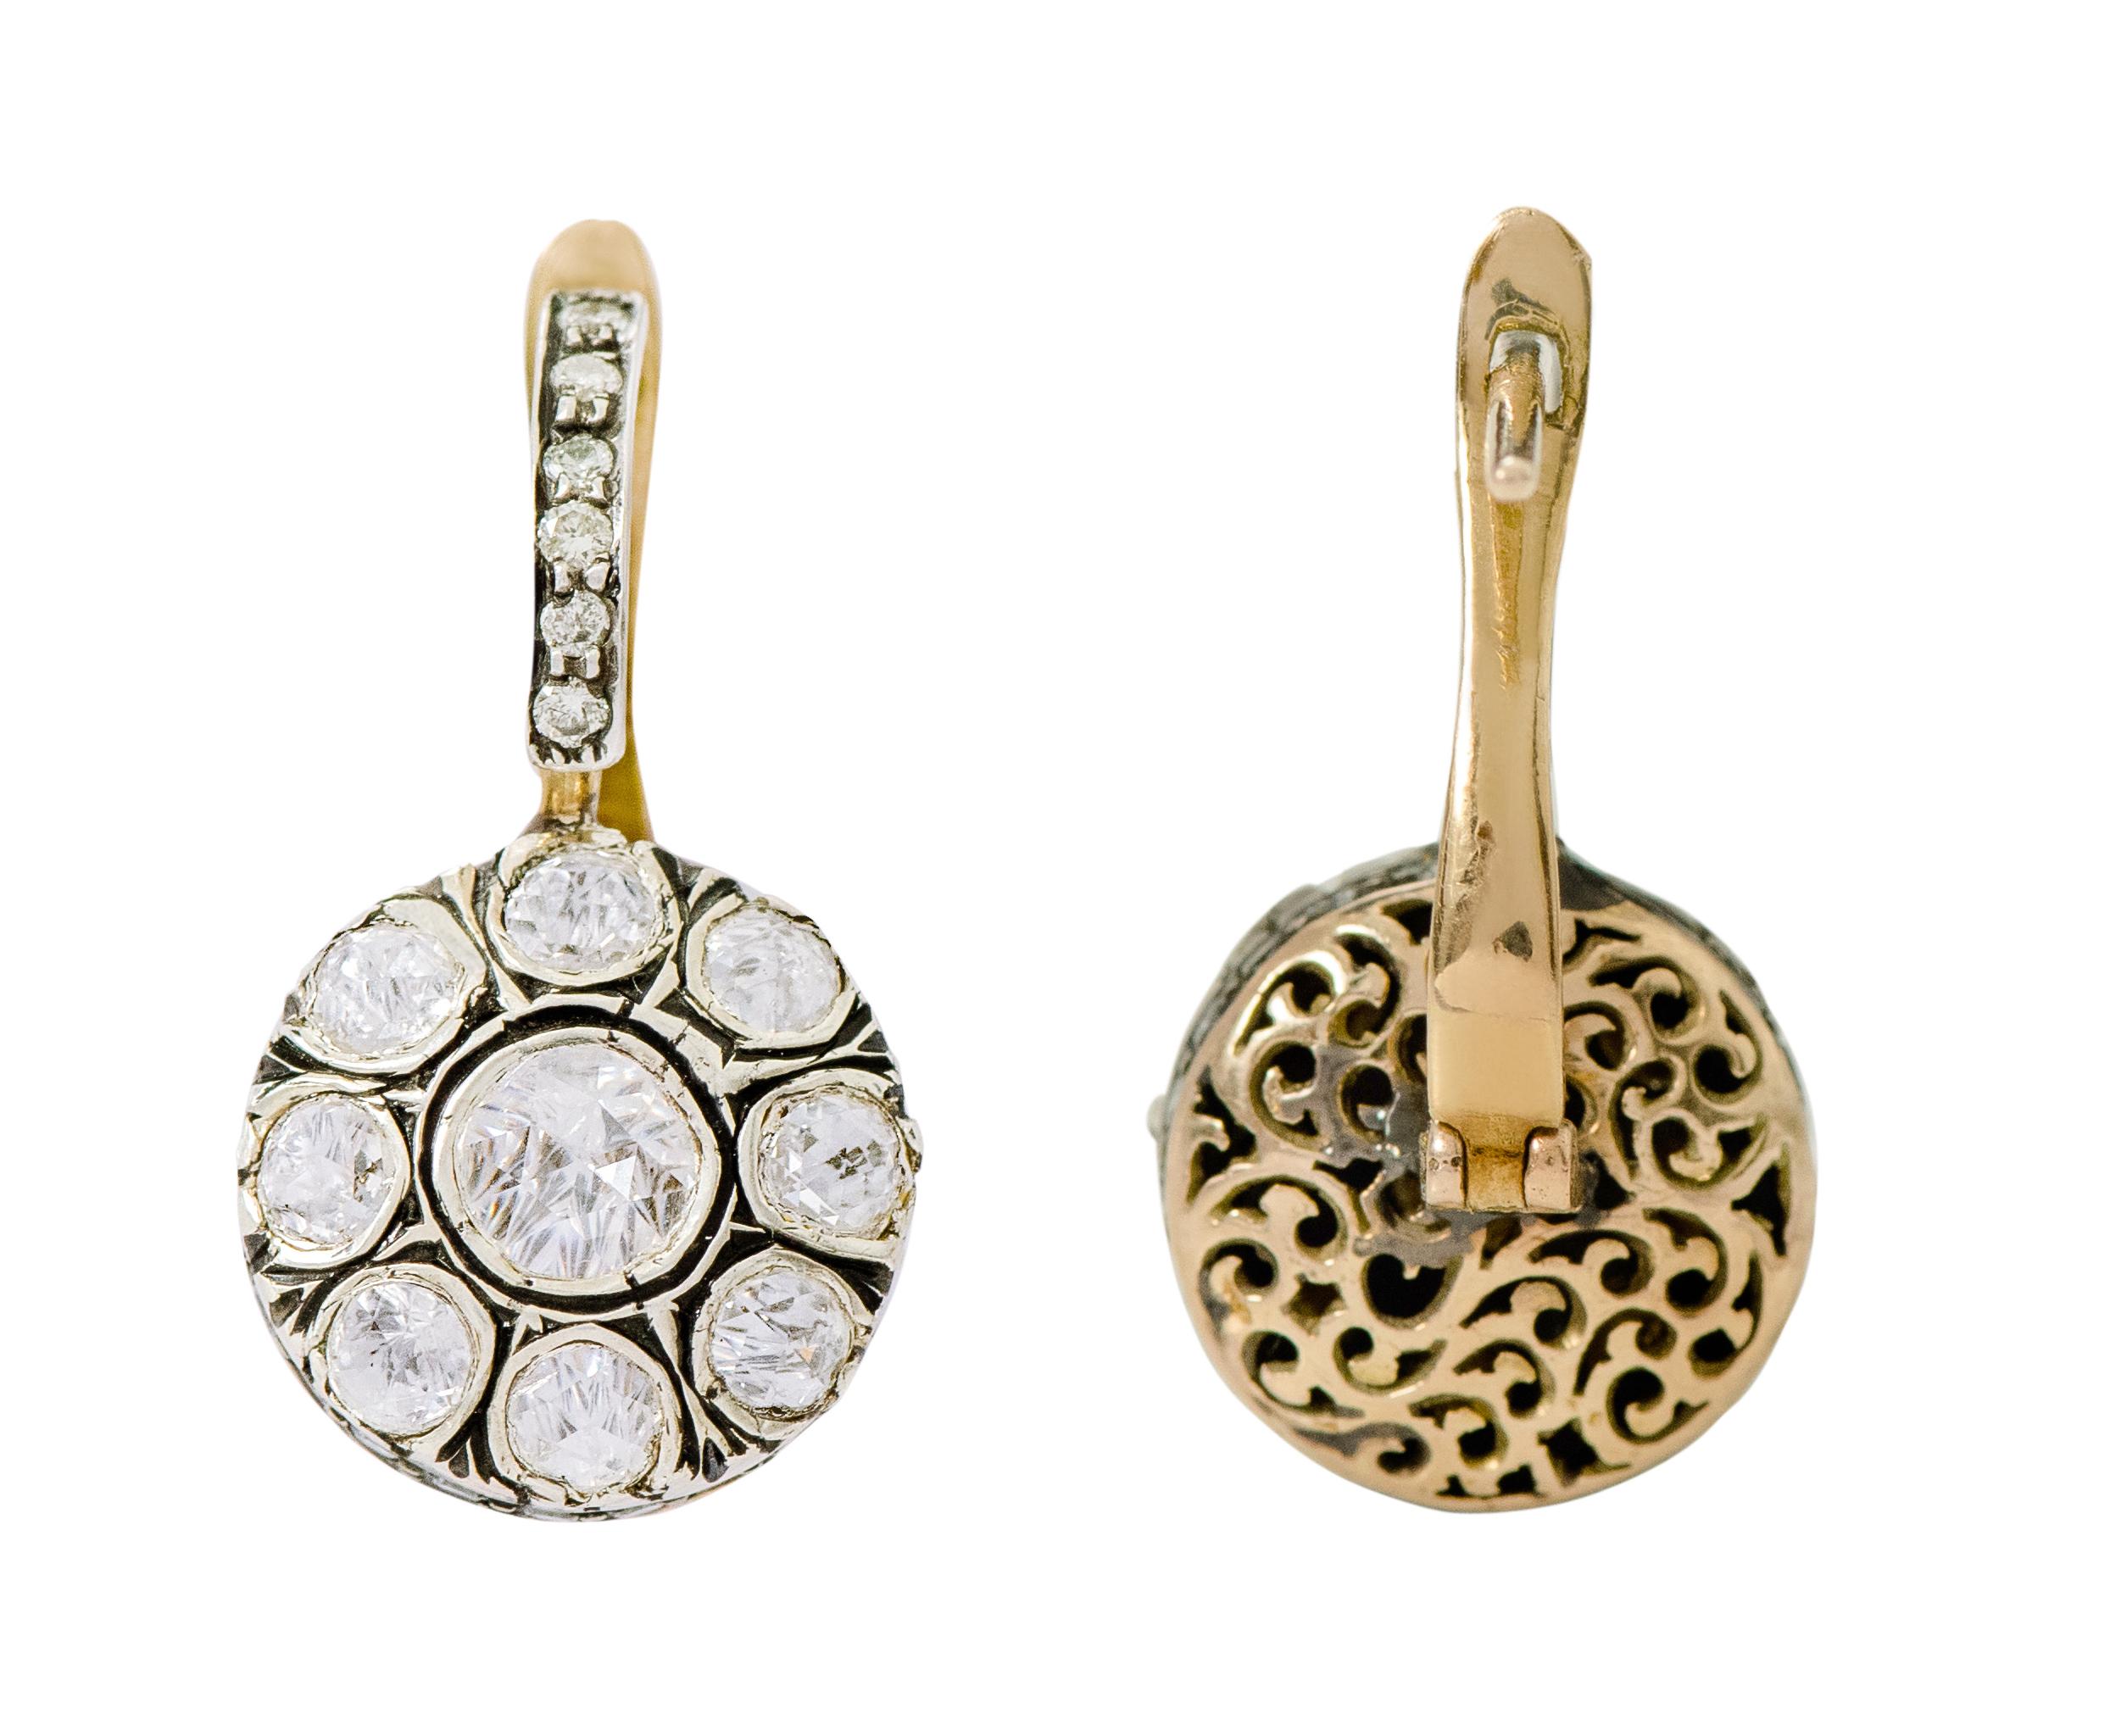 Rose-Cut Diamond Dangle Earrings in Victorian Style

This Victorian period art-deco style atypical rose-cut diamond earring is marvelous. The identical round rose cut diamond solitaire set in bezel setting surrounds the bigger center round rose cut